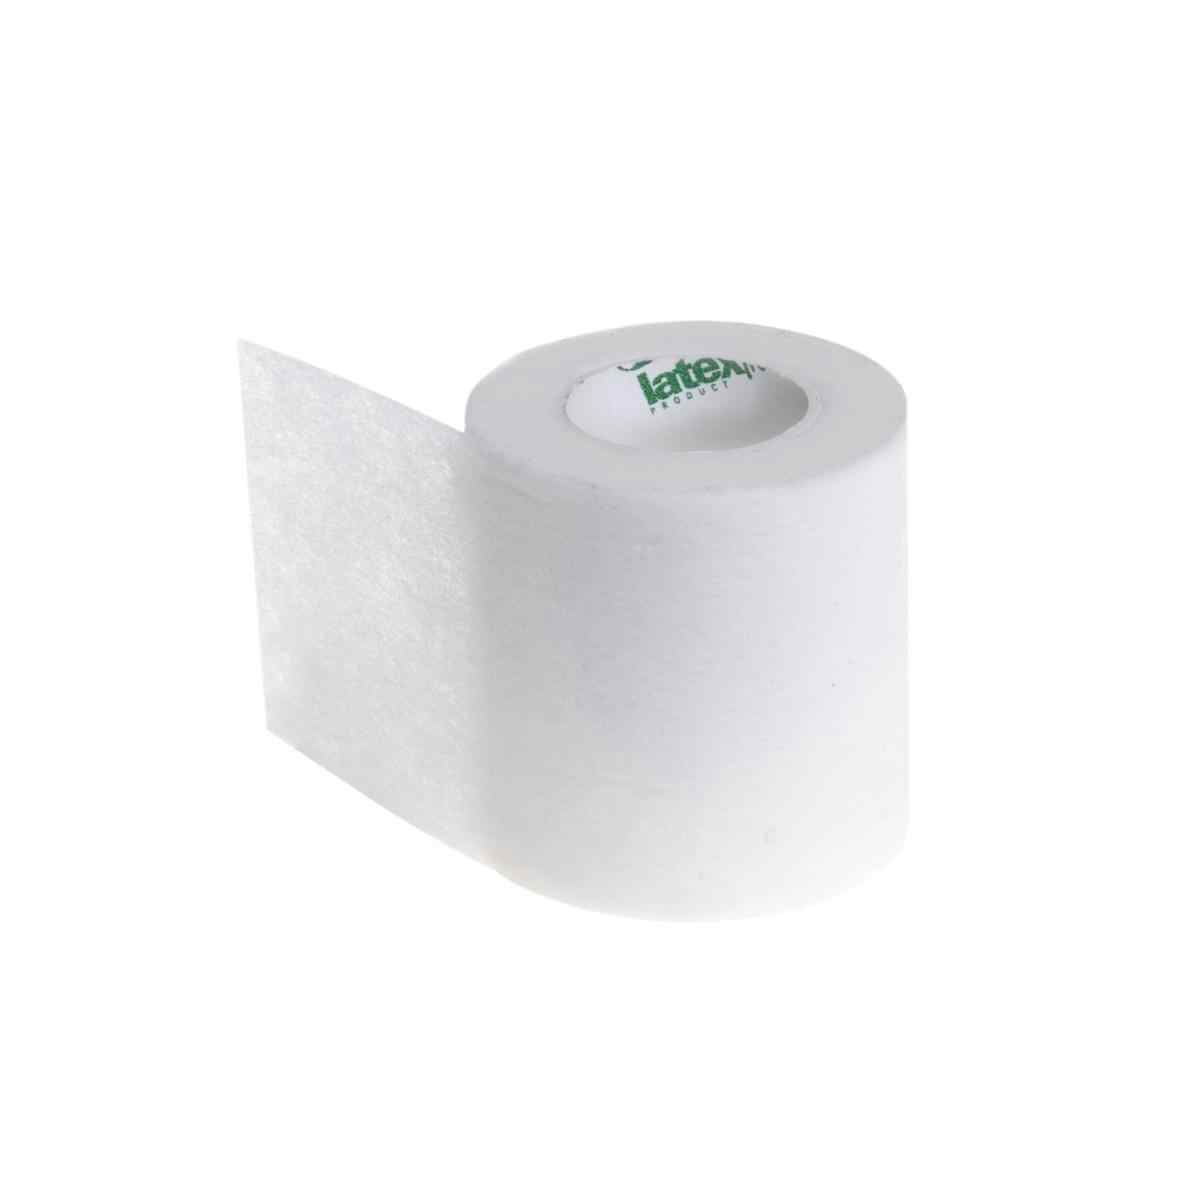 CURAD Paper Adhesive Tape with Dispenser, NON260002DZ, 2" X 10 yd - Box of 6